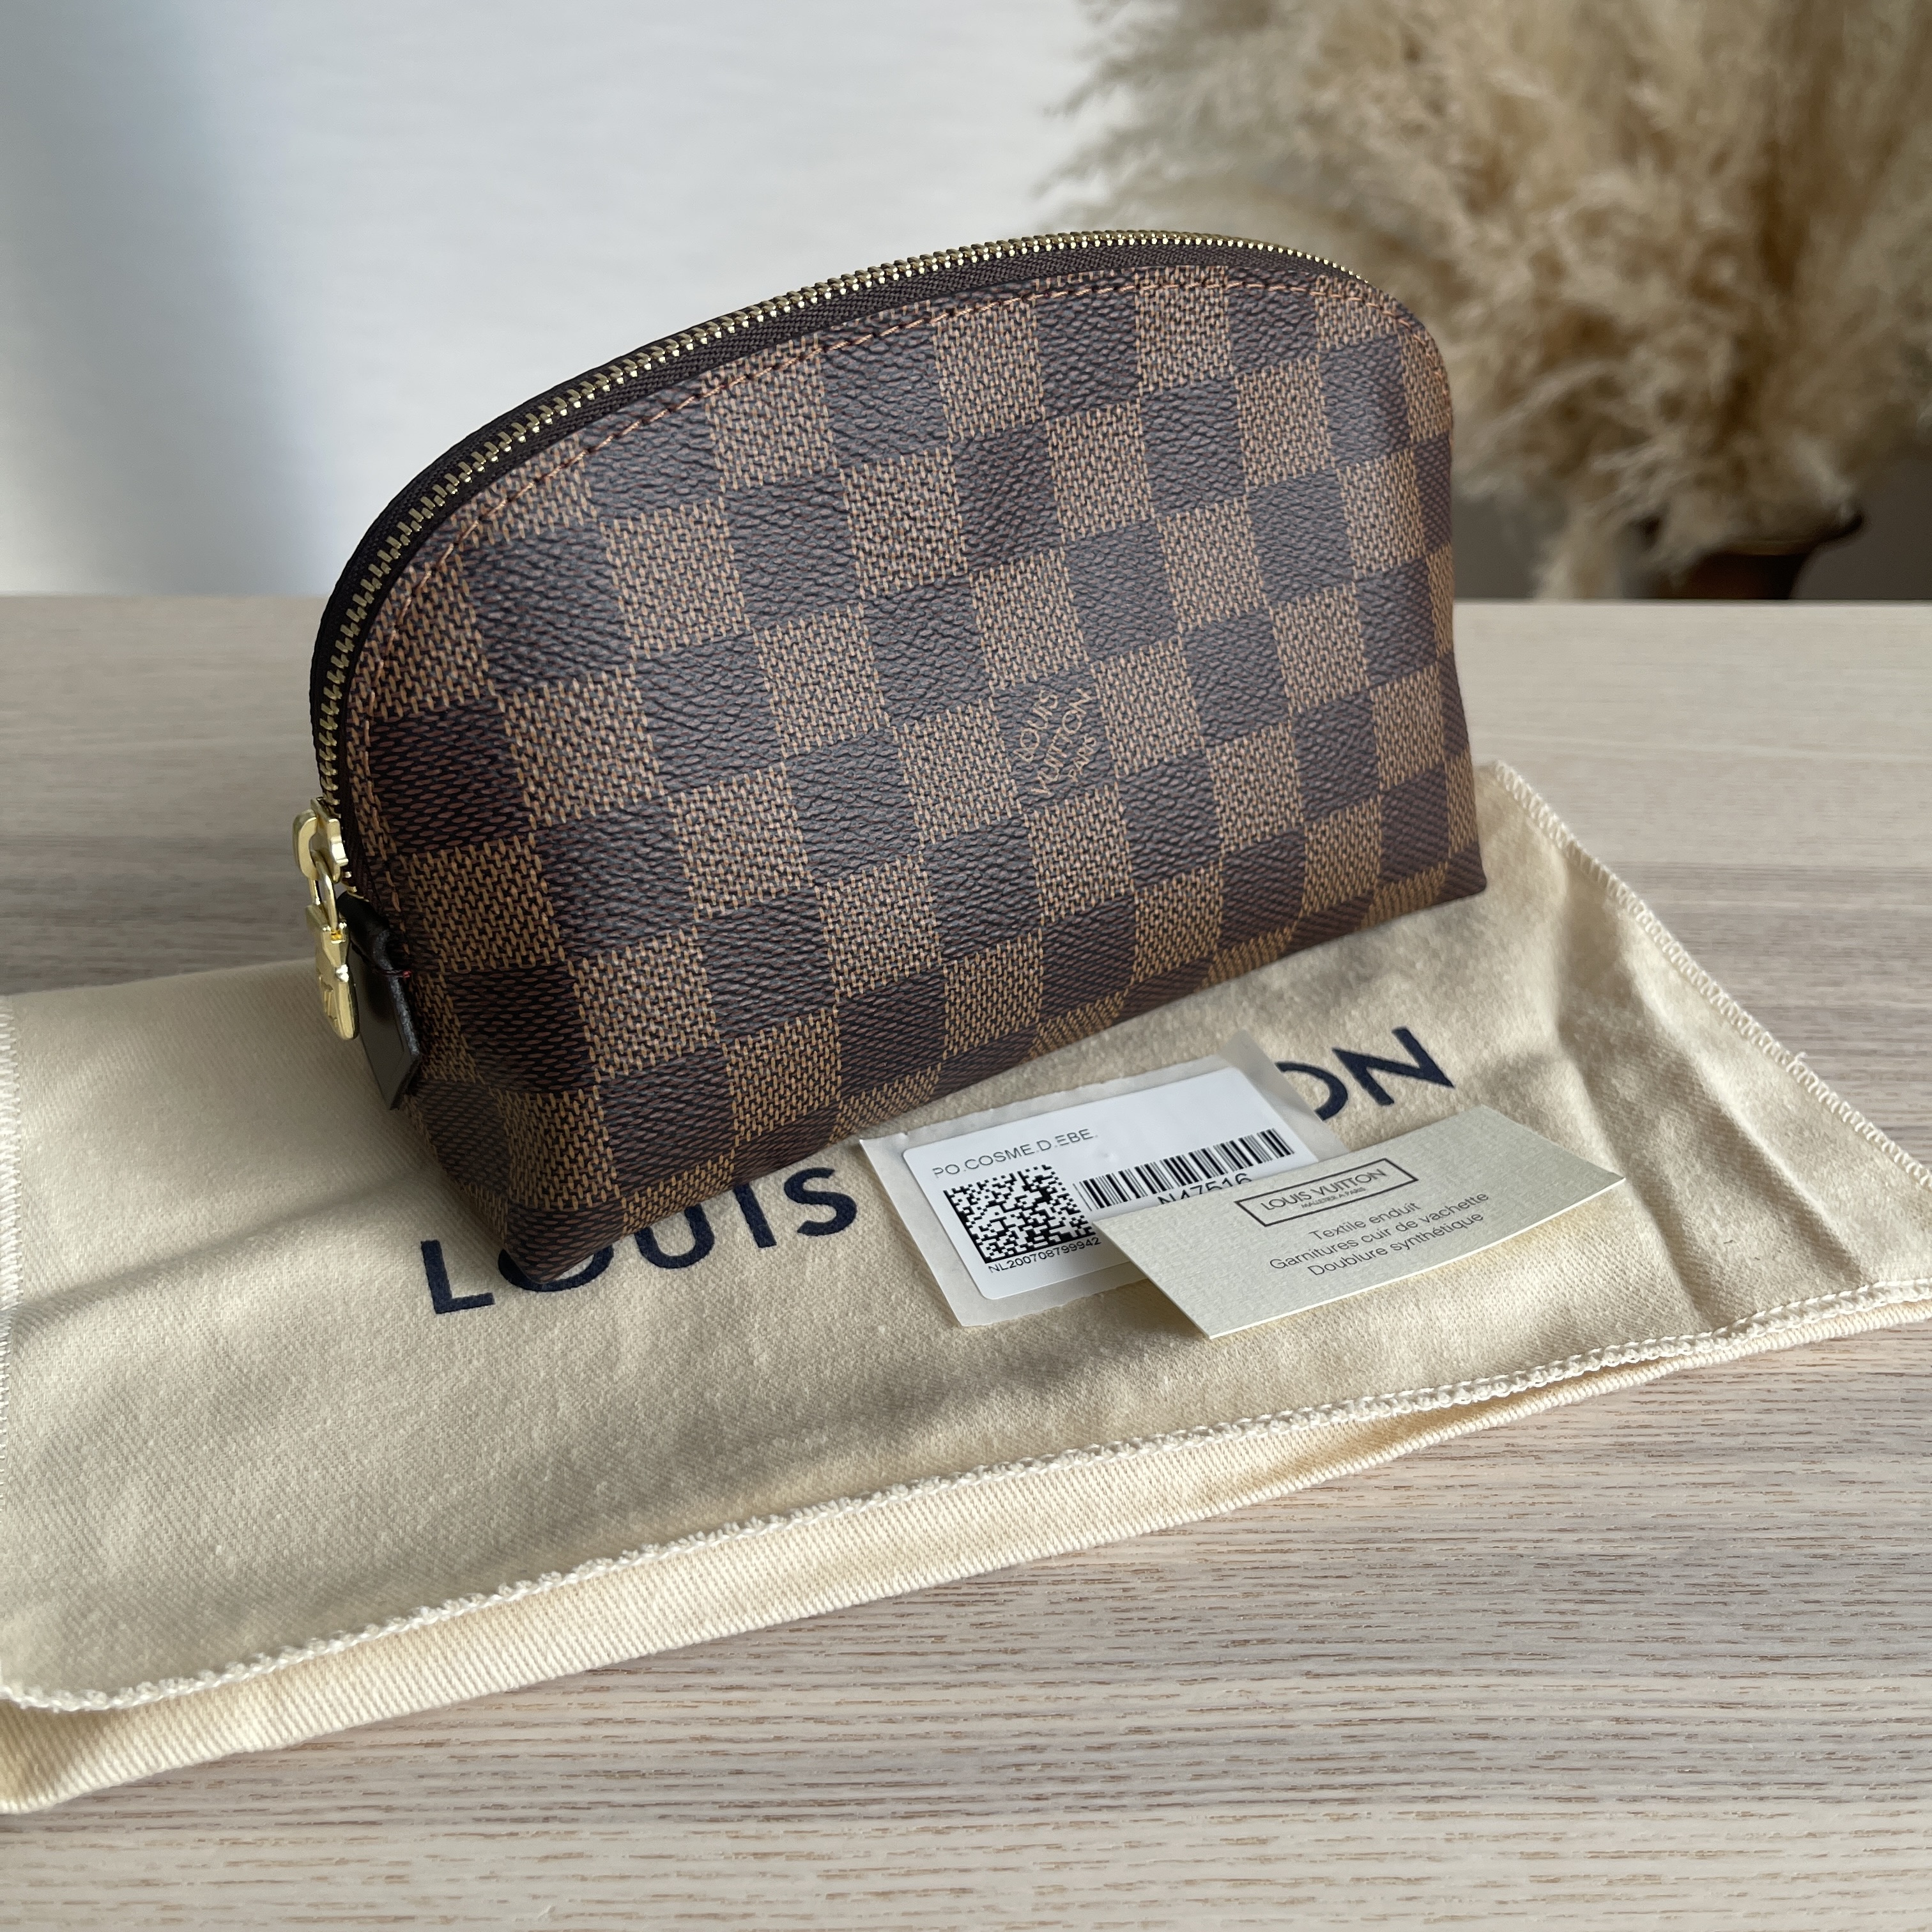 Lv Cosmetic Pouch Pm In Damier Ebene